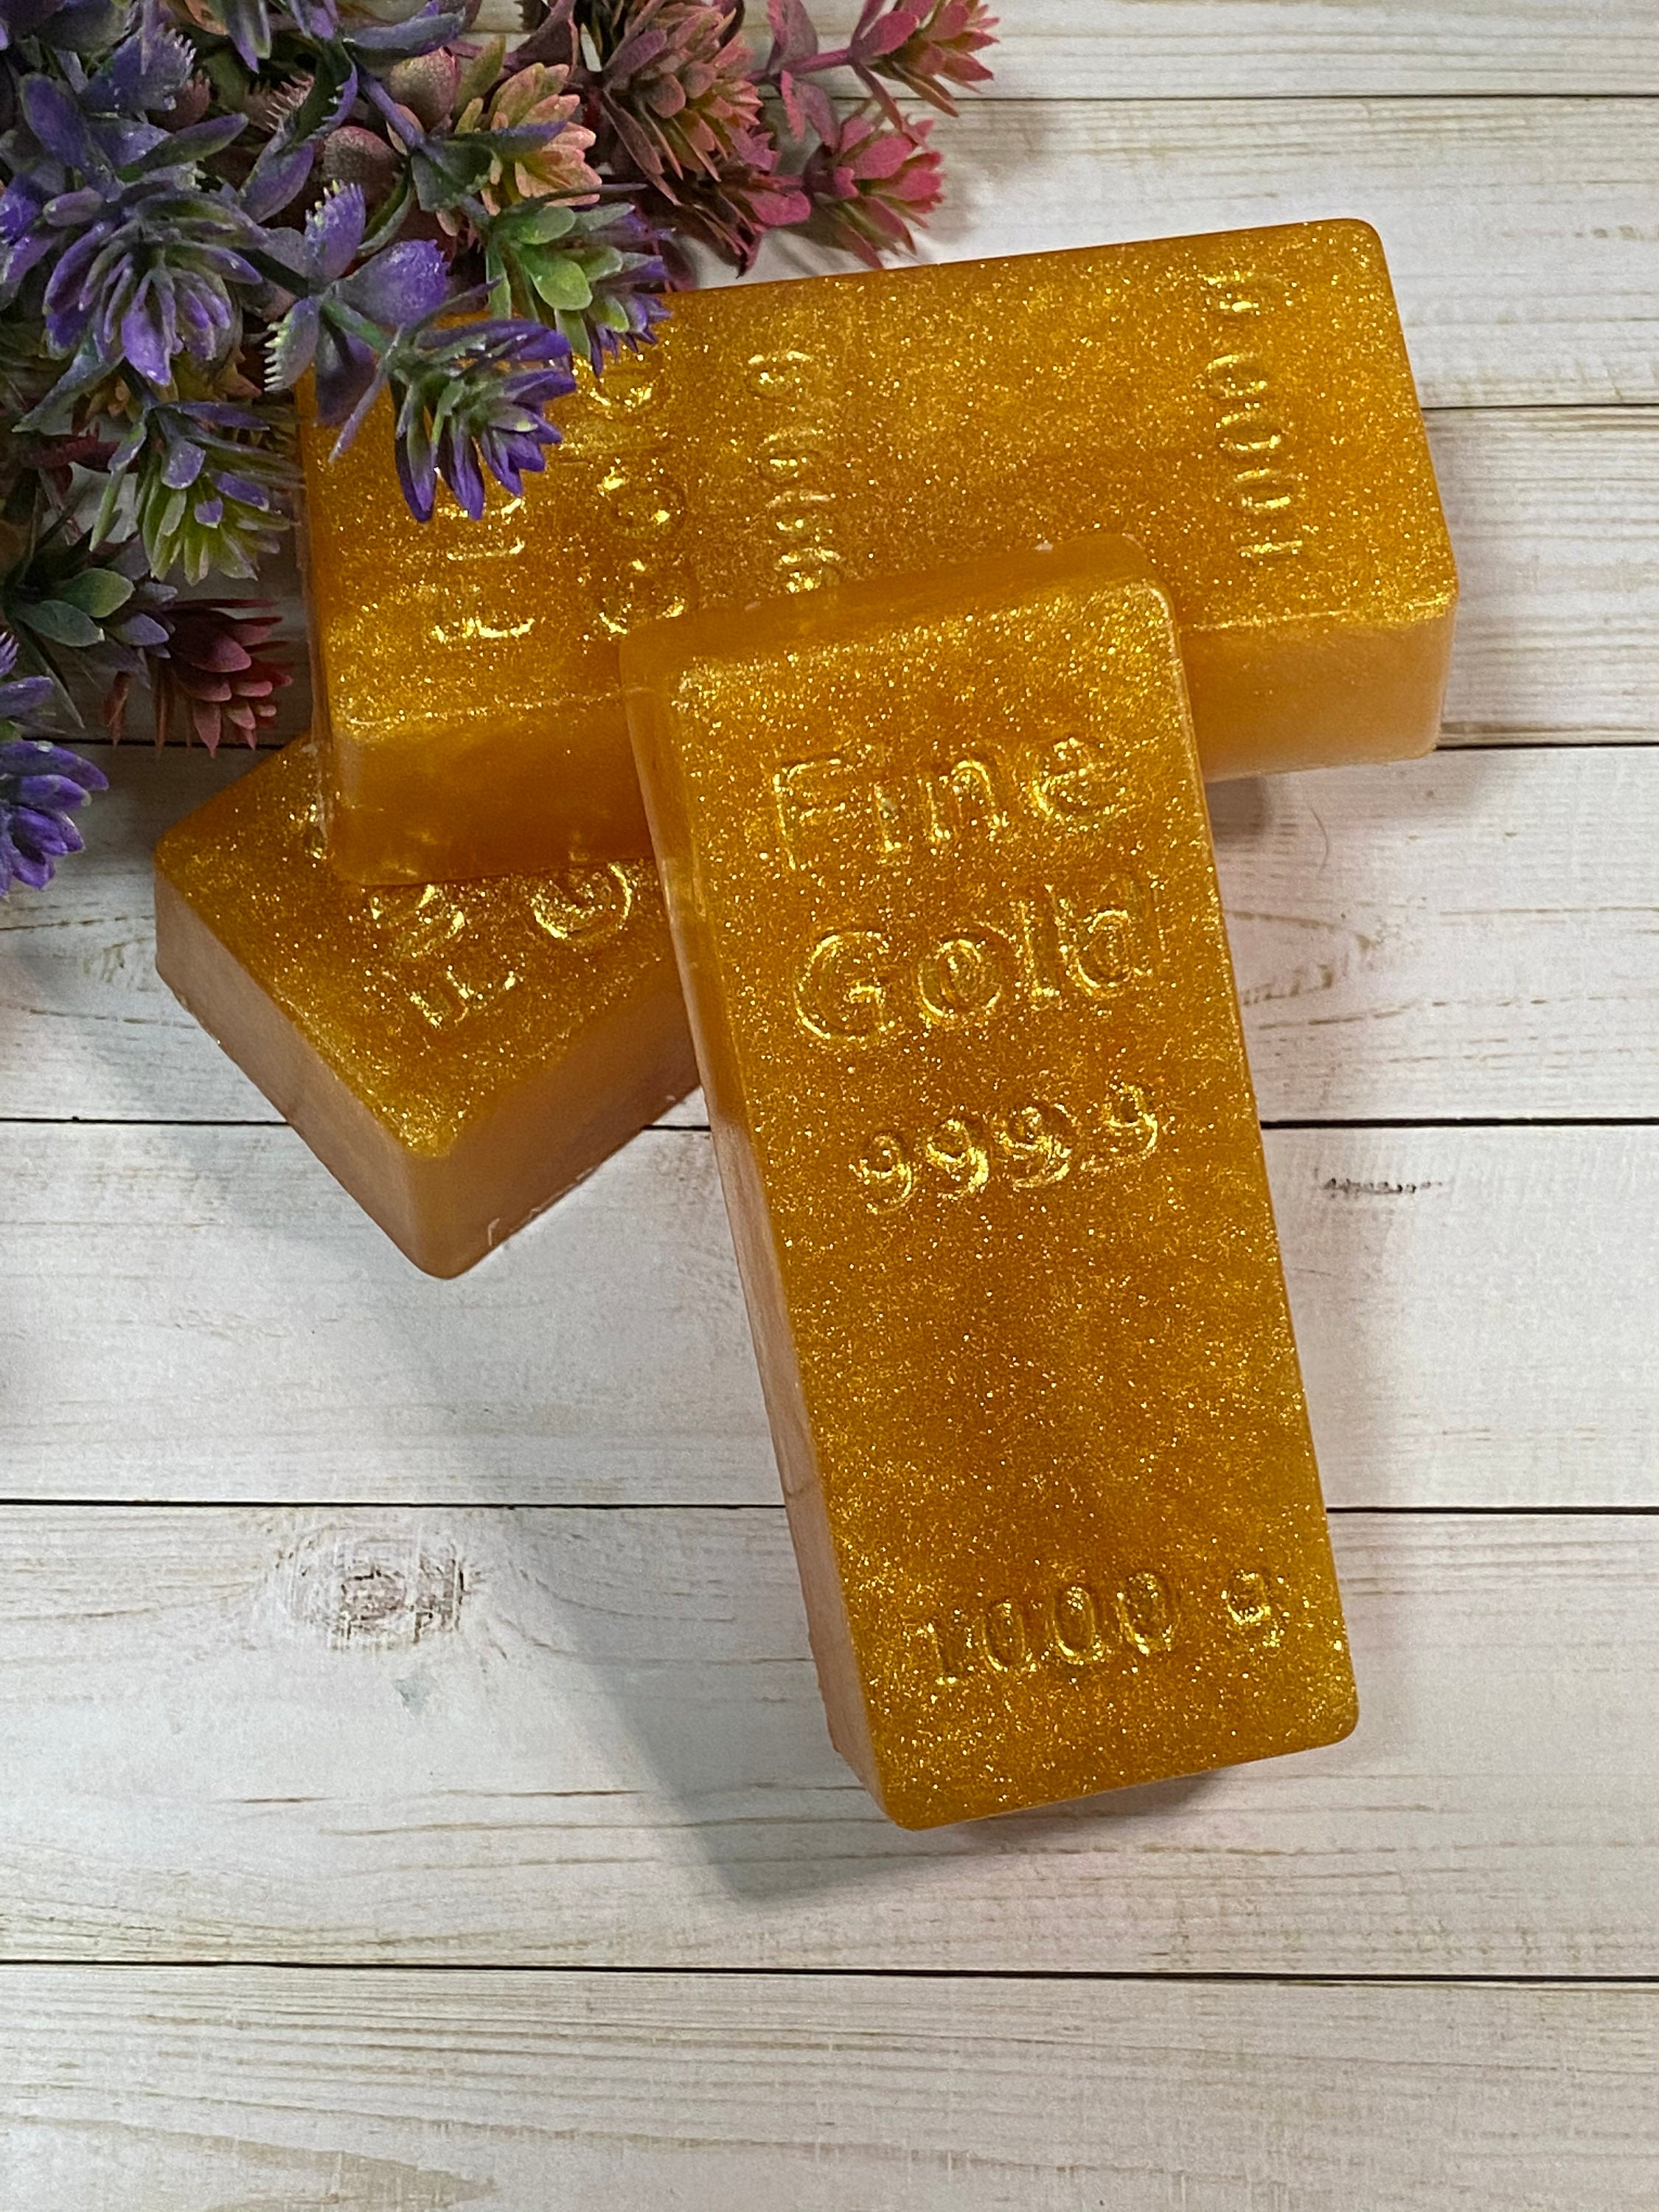 Cast Iron Molds – Make Your Own Gold Bars.com